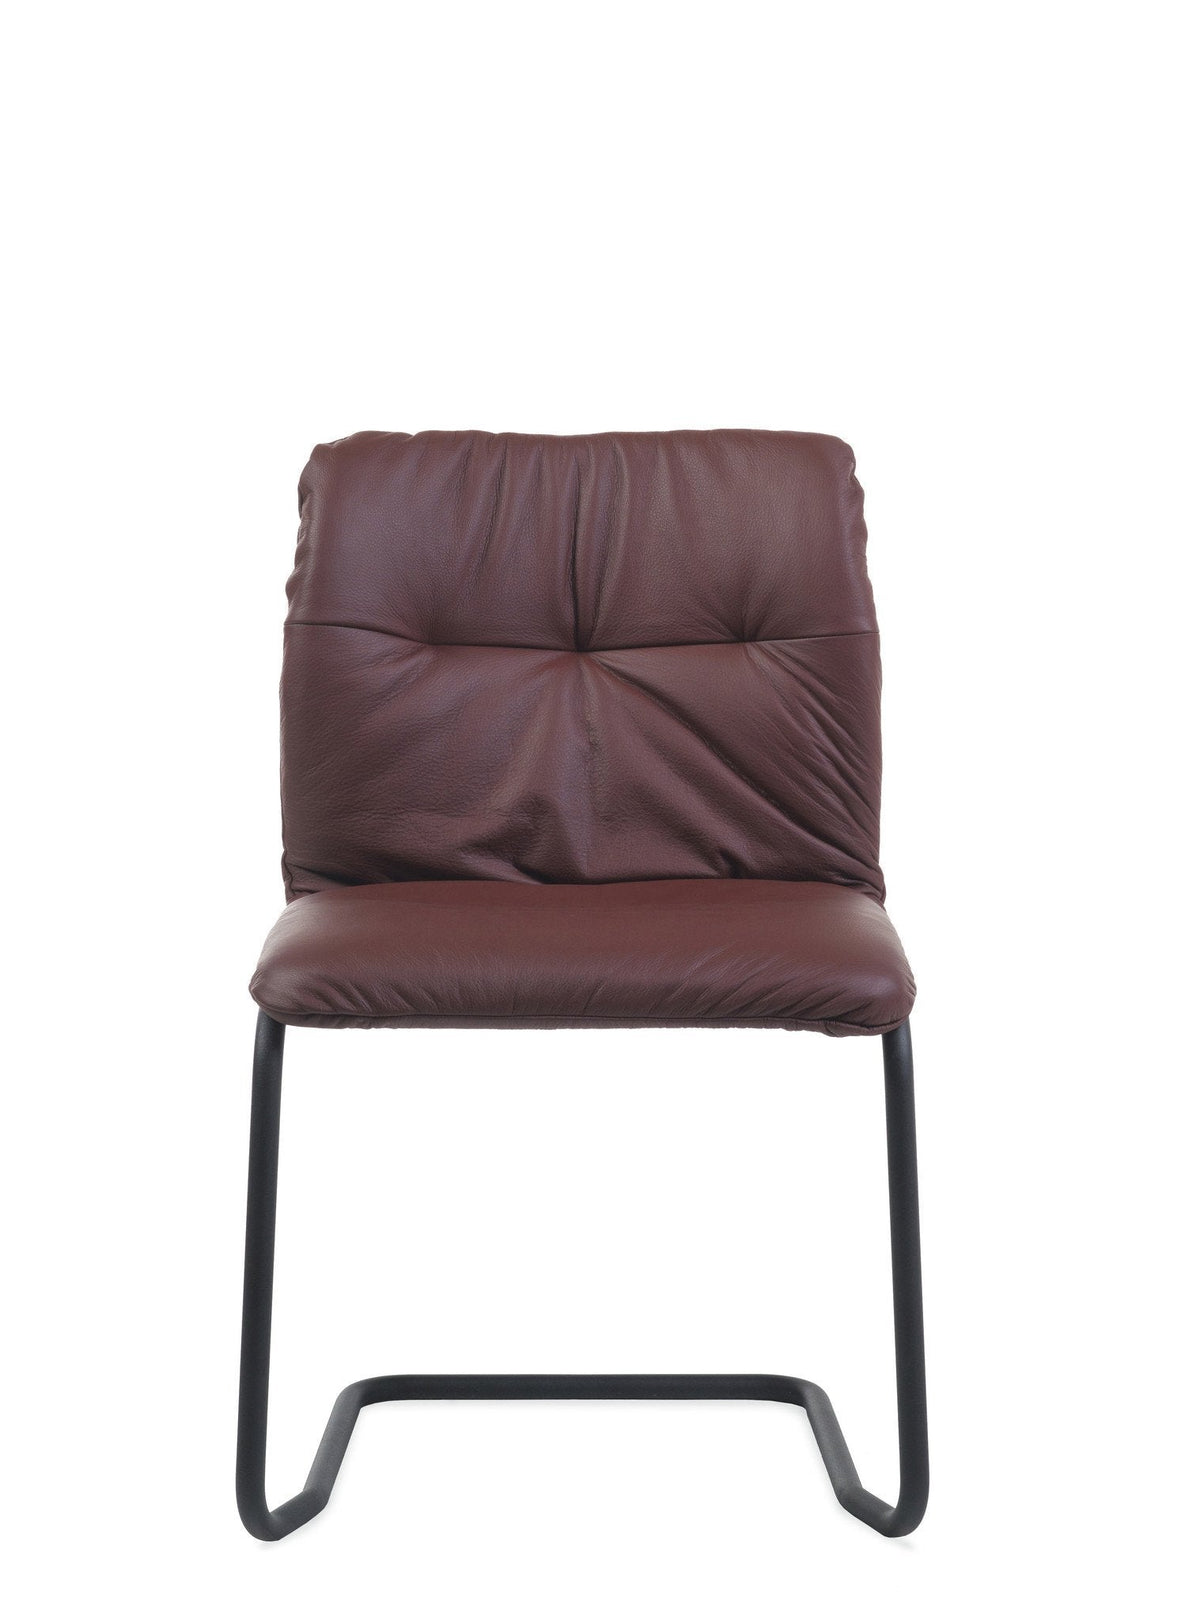 Haddoc Oyster 10 Side Chair-Johanson Design-Contract Furniture Store